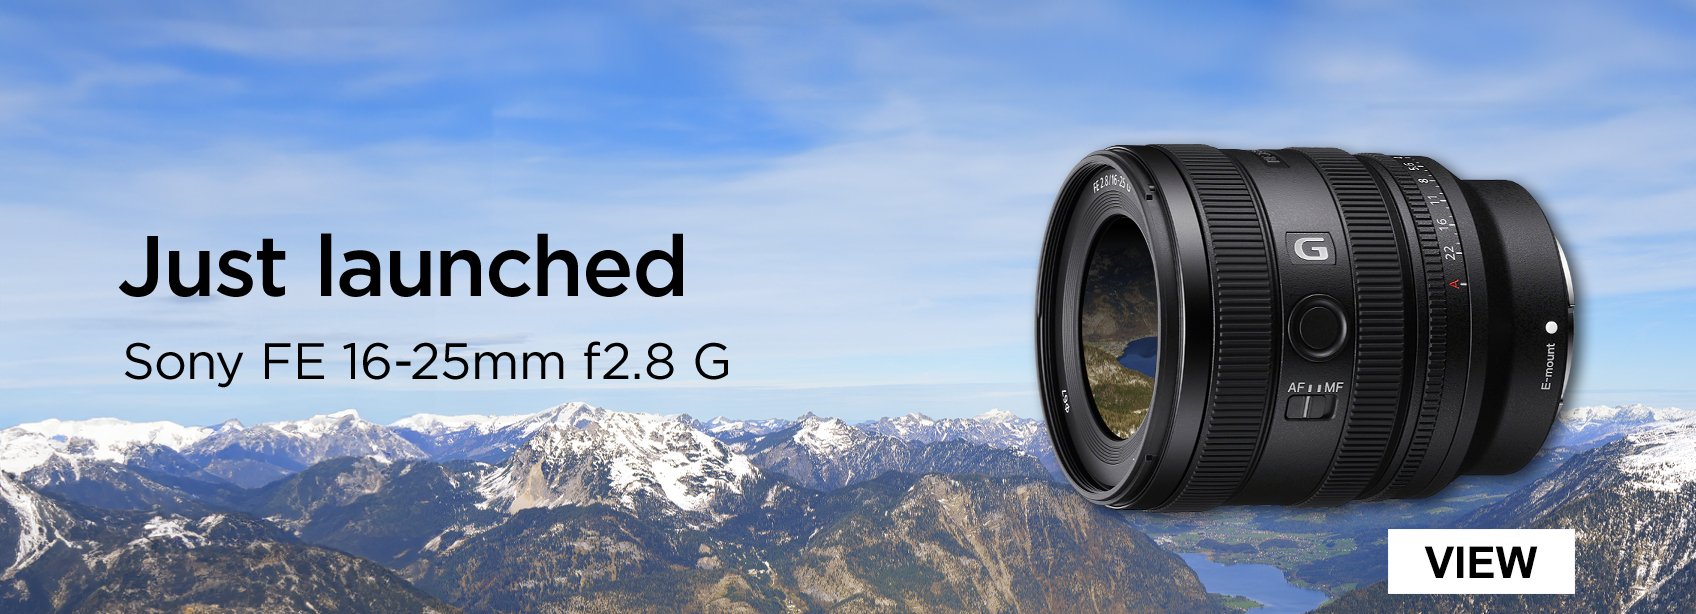 Just Launched Sony FE 16-25mm f2.8 G